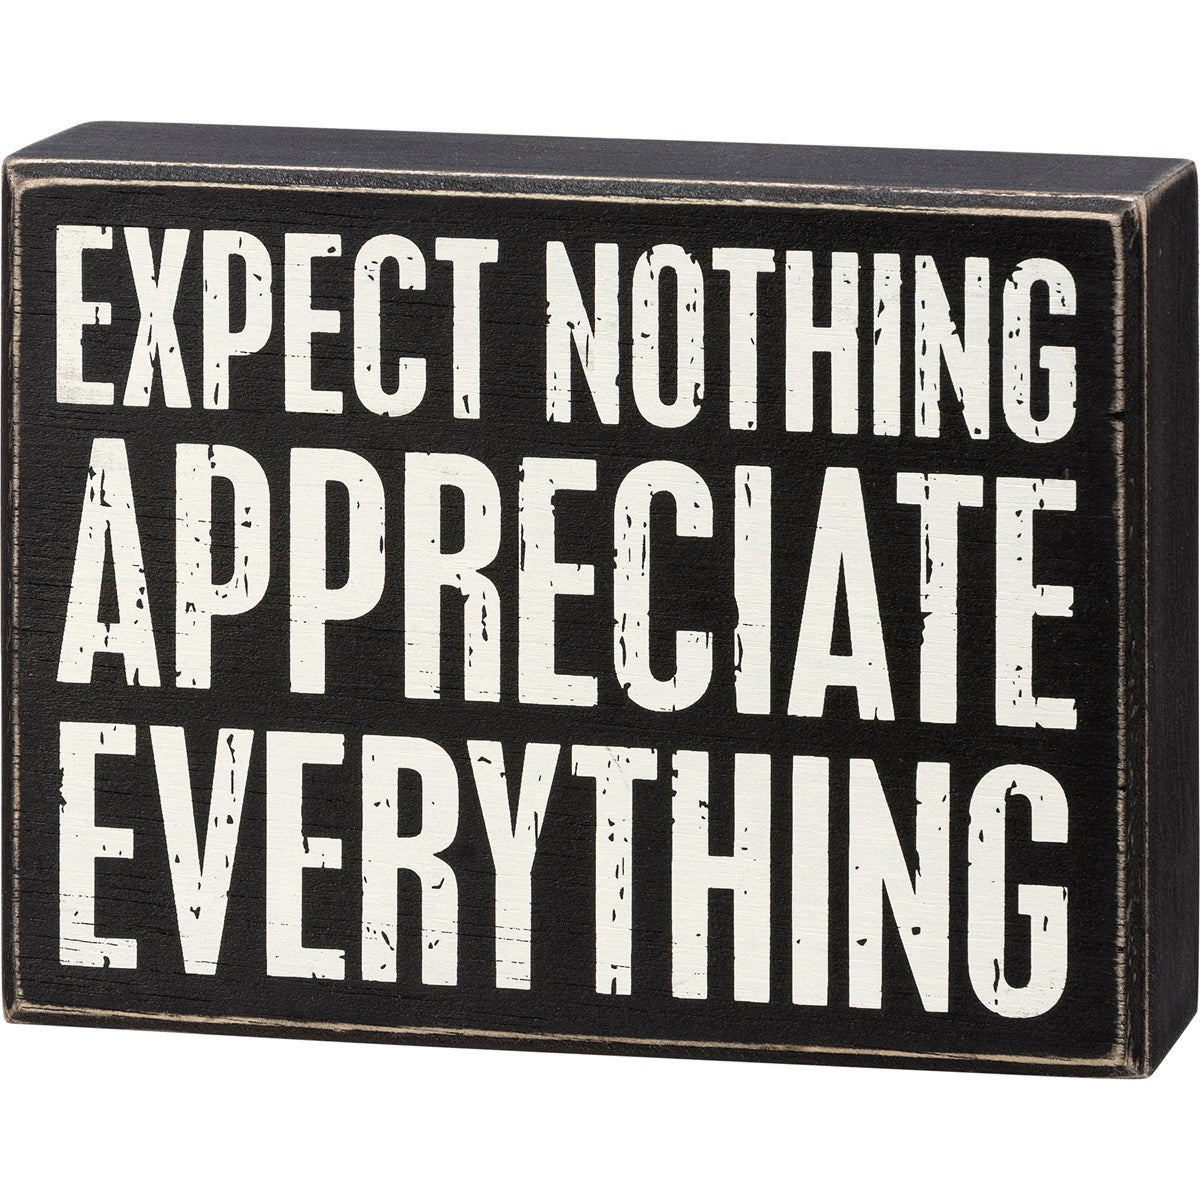 Box Sign - Expect Nothing